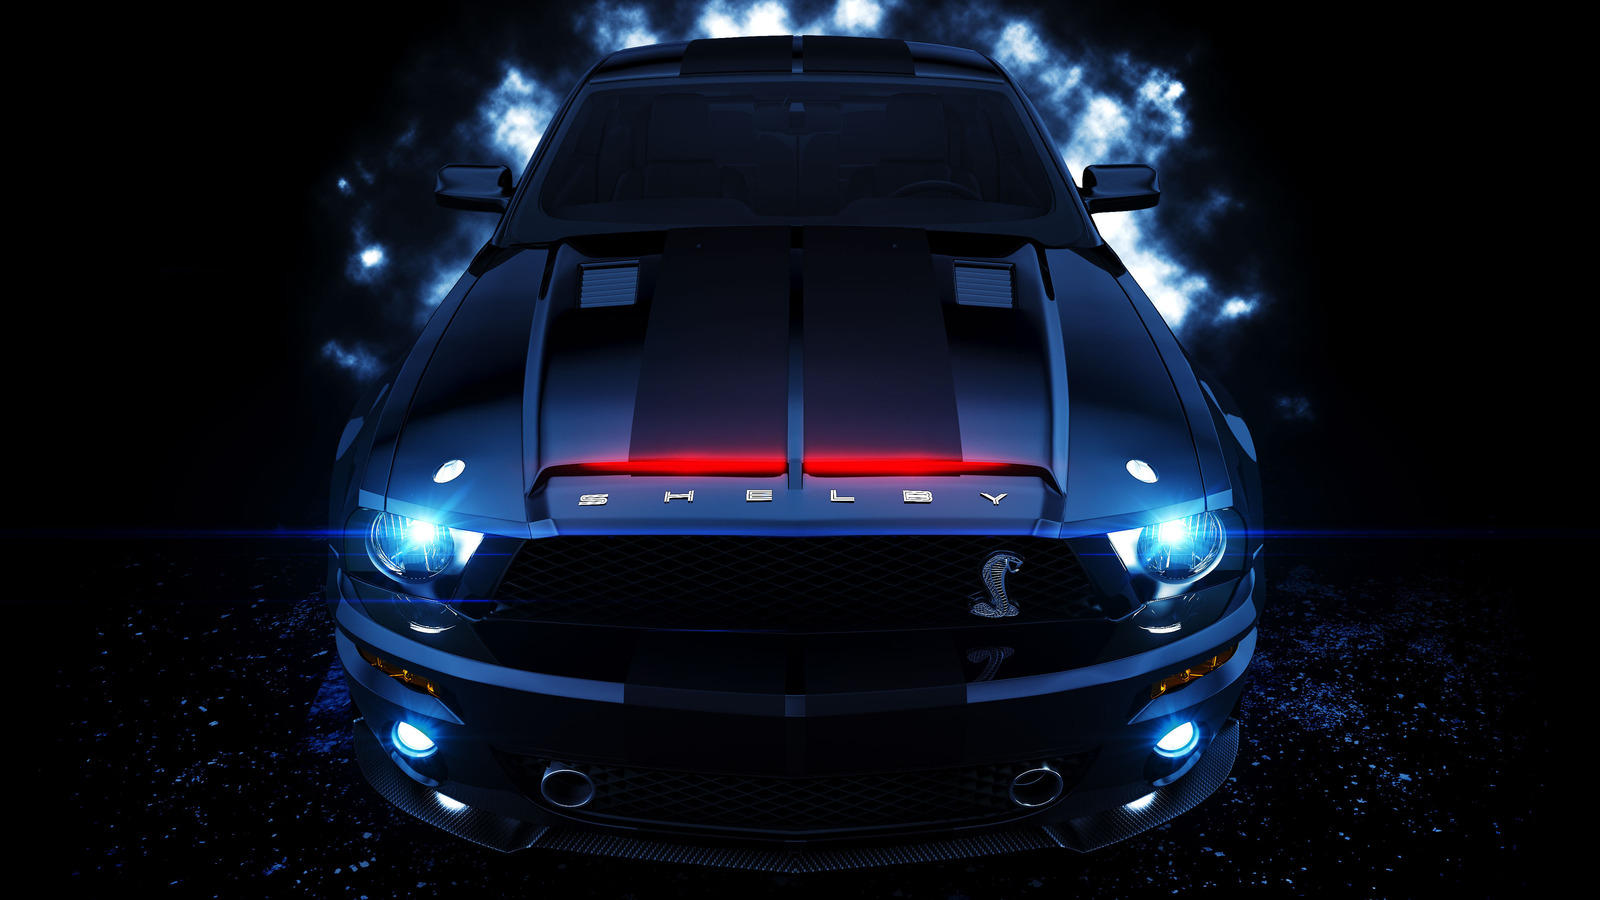 Mechanical Blue Ford Mustang Shelby Gt500 Car Picture HD Wallpaper